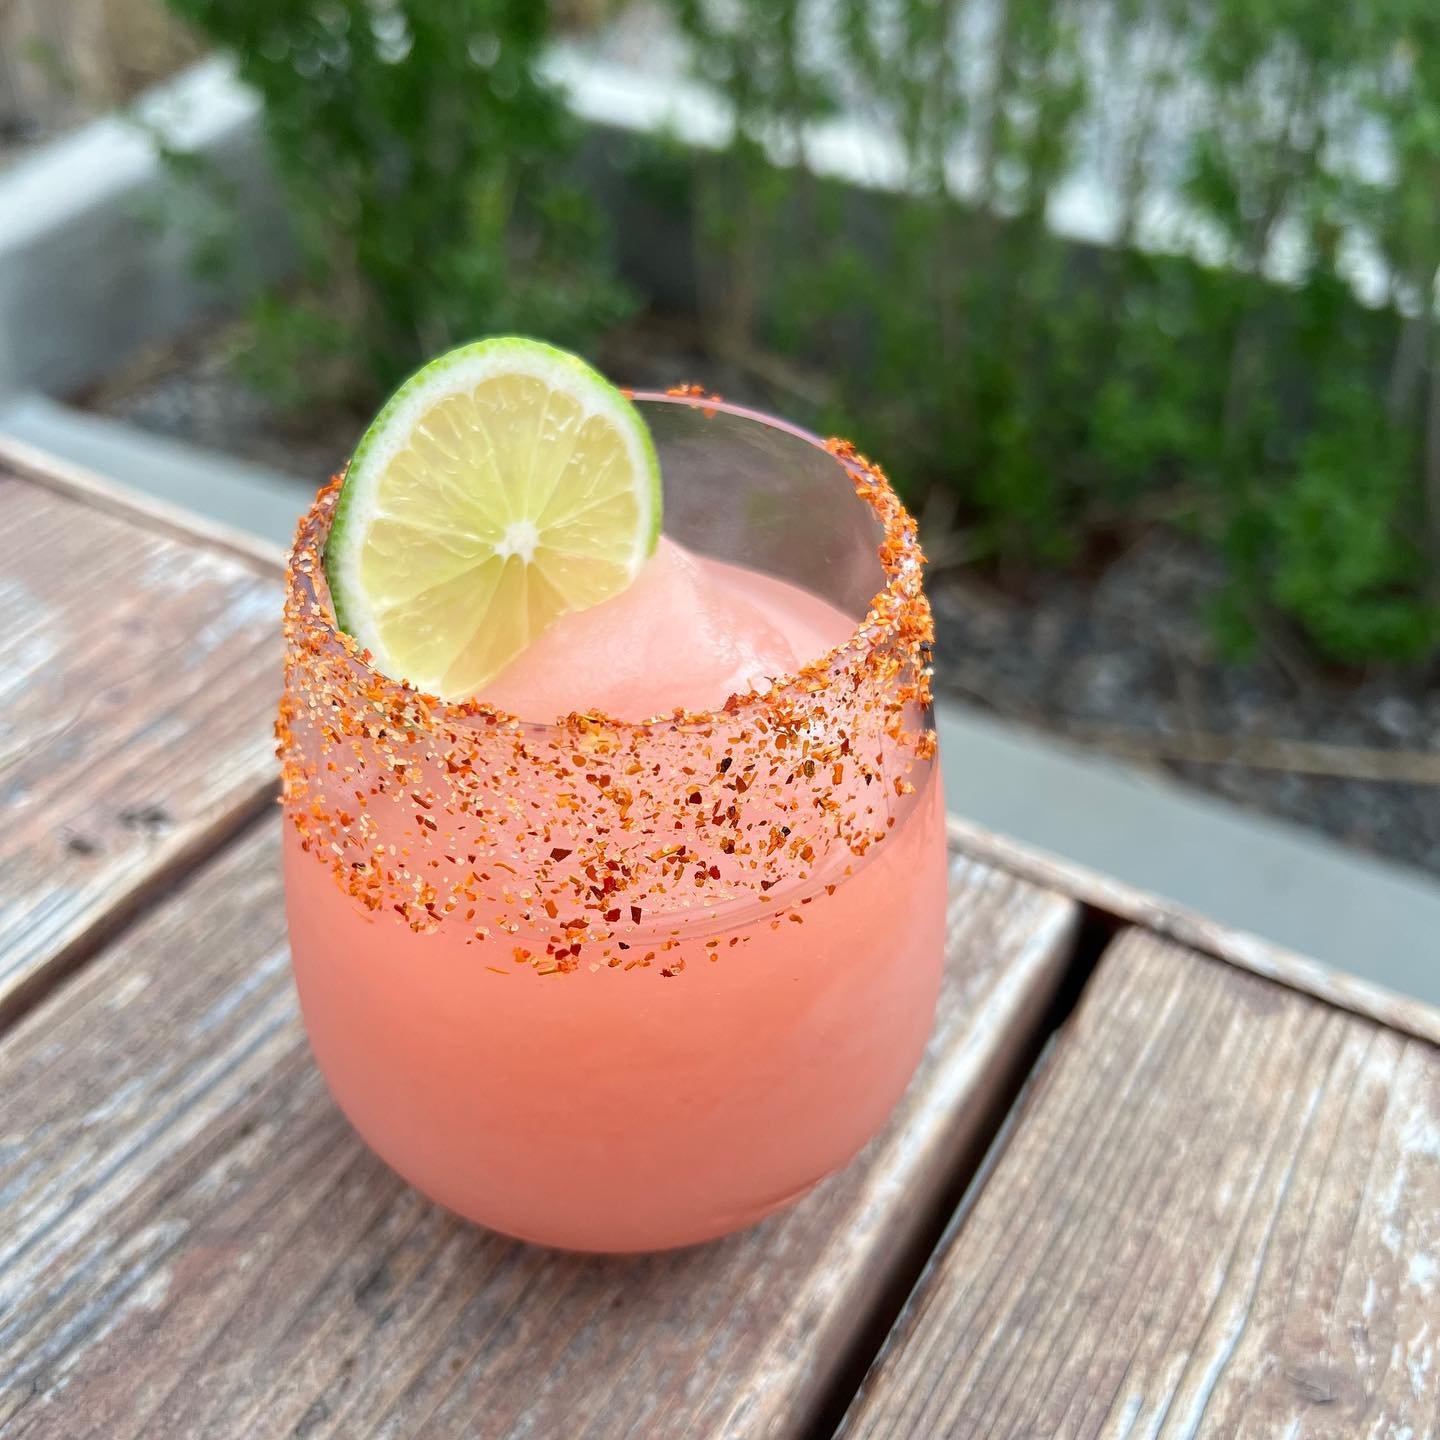 We&rsquo;ve got two new baddies for you. Starting with our weekend frozen flavor : a Spicy Watermelon Margarita, and our feature happy hour cocktail: a Whiskey Smash, (whiskey, mint, lemon). Come try them while they are still available! 

#goldpoint 